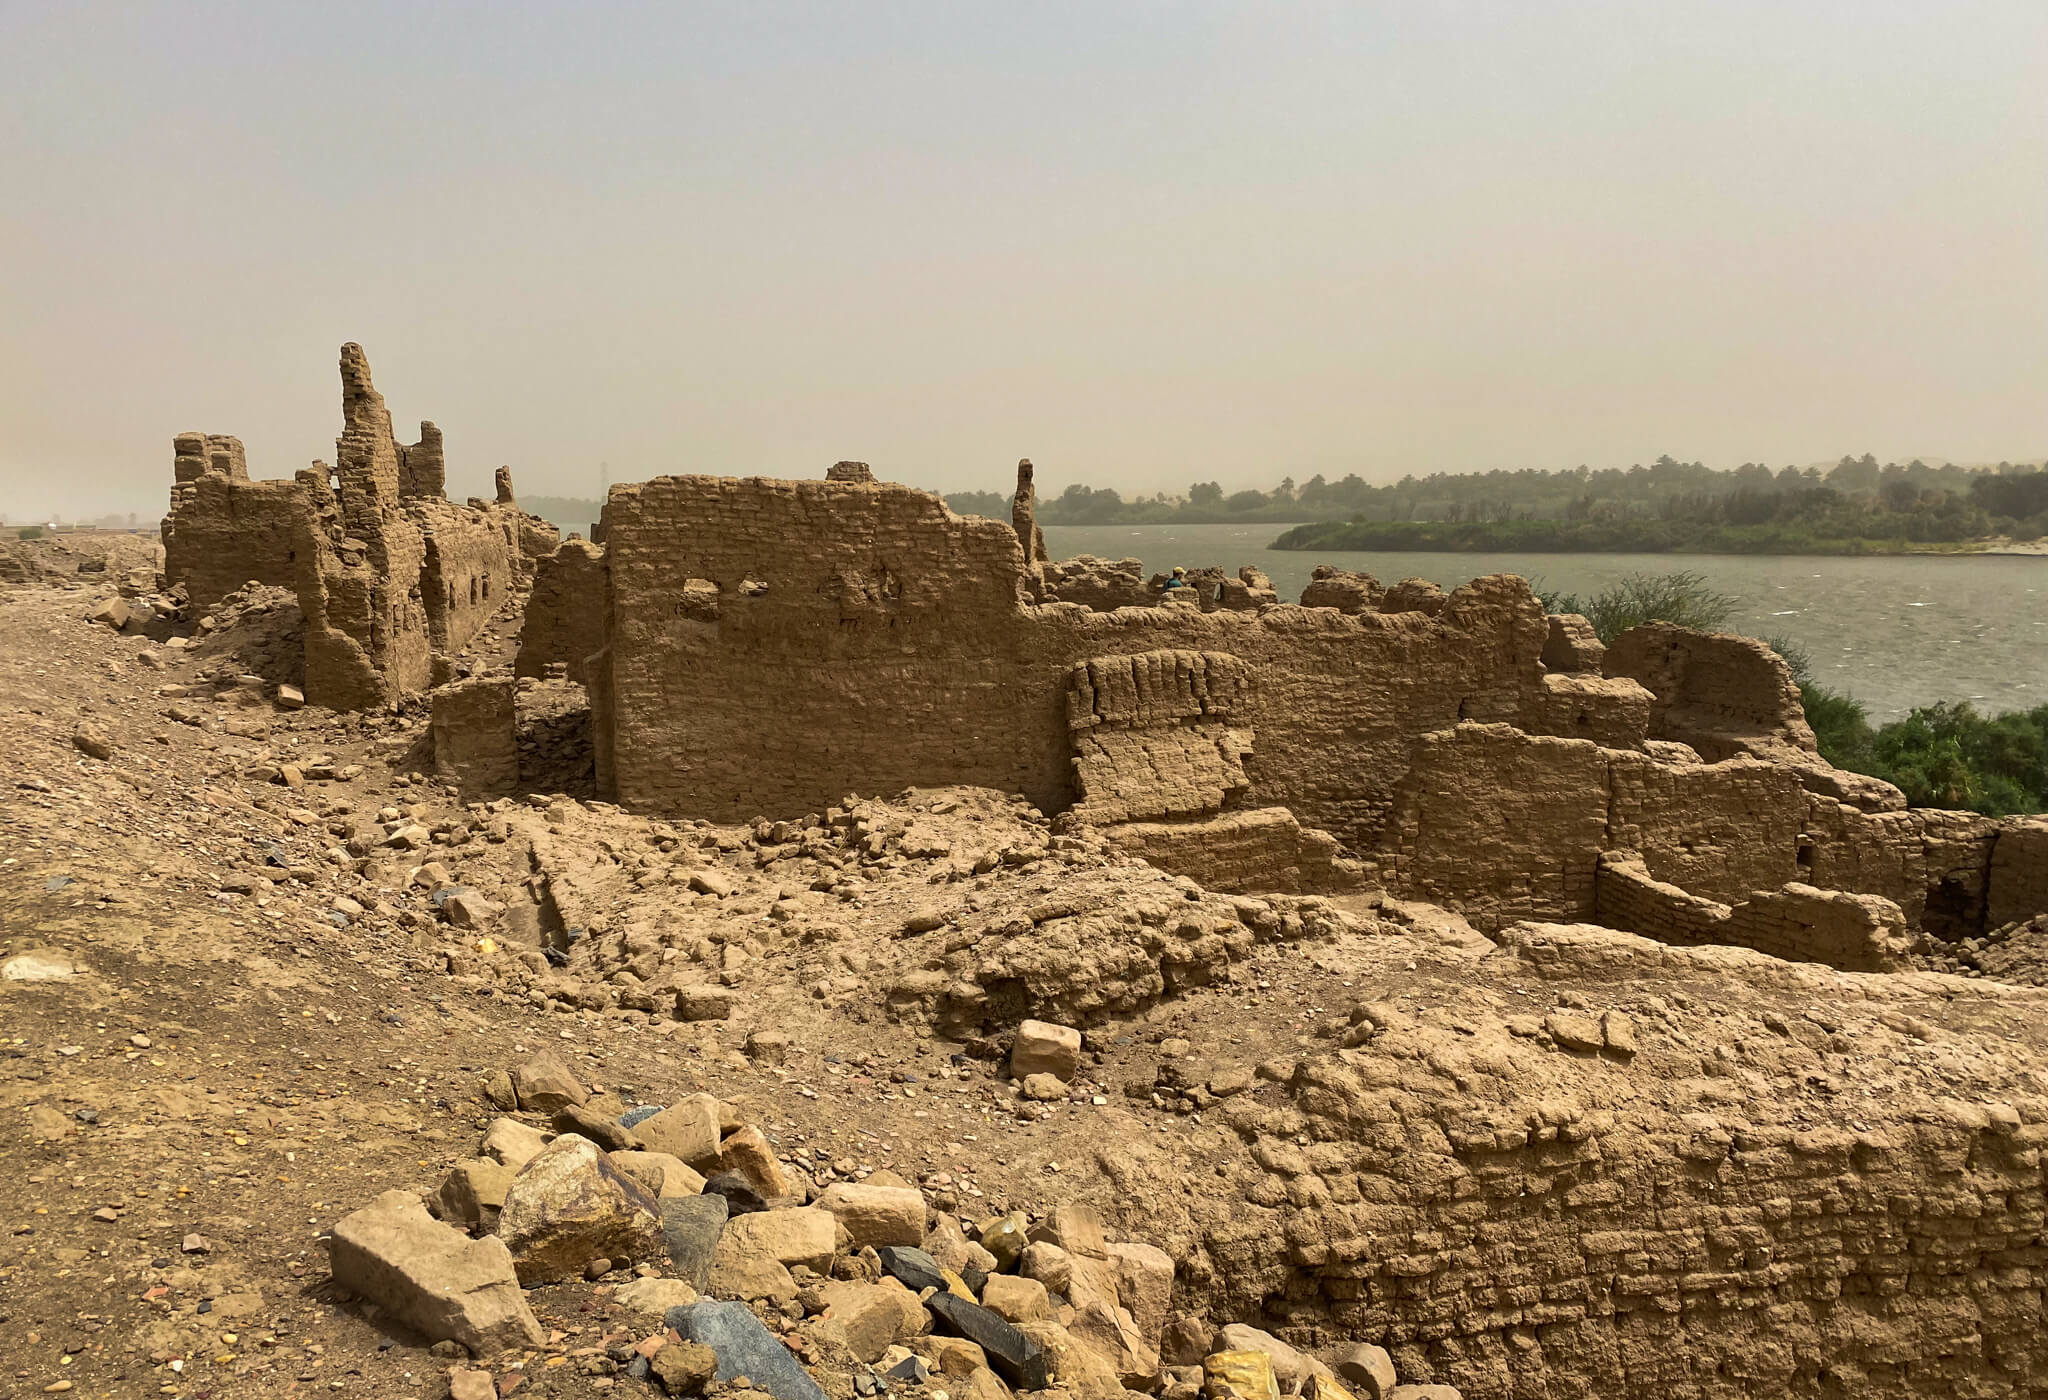 Some crumbling walls of an ancient building with the Nile in the background.